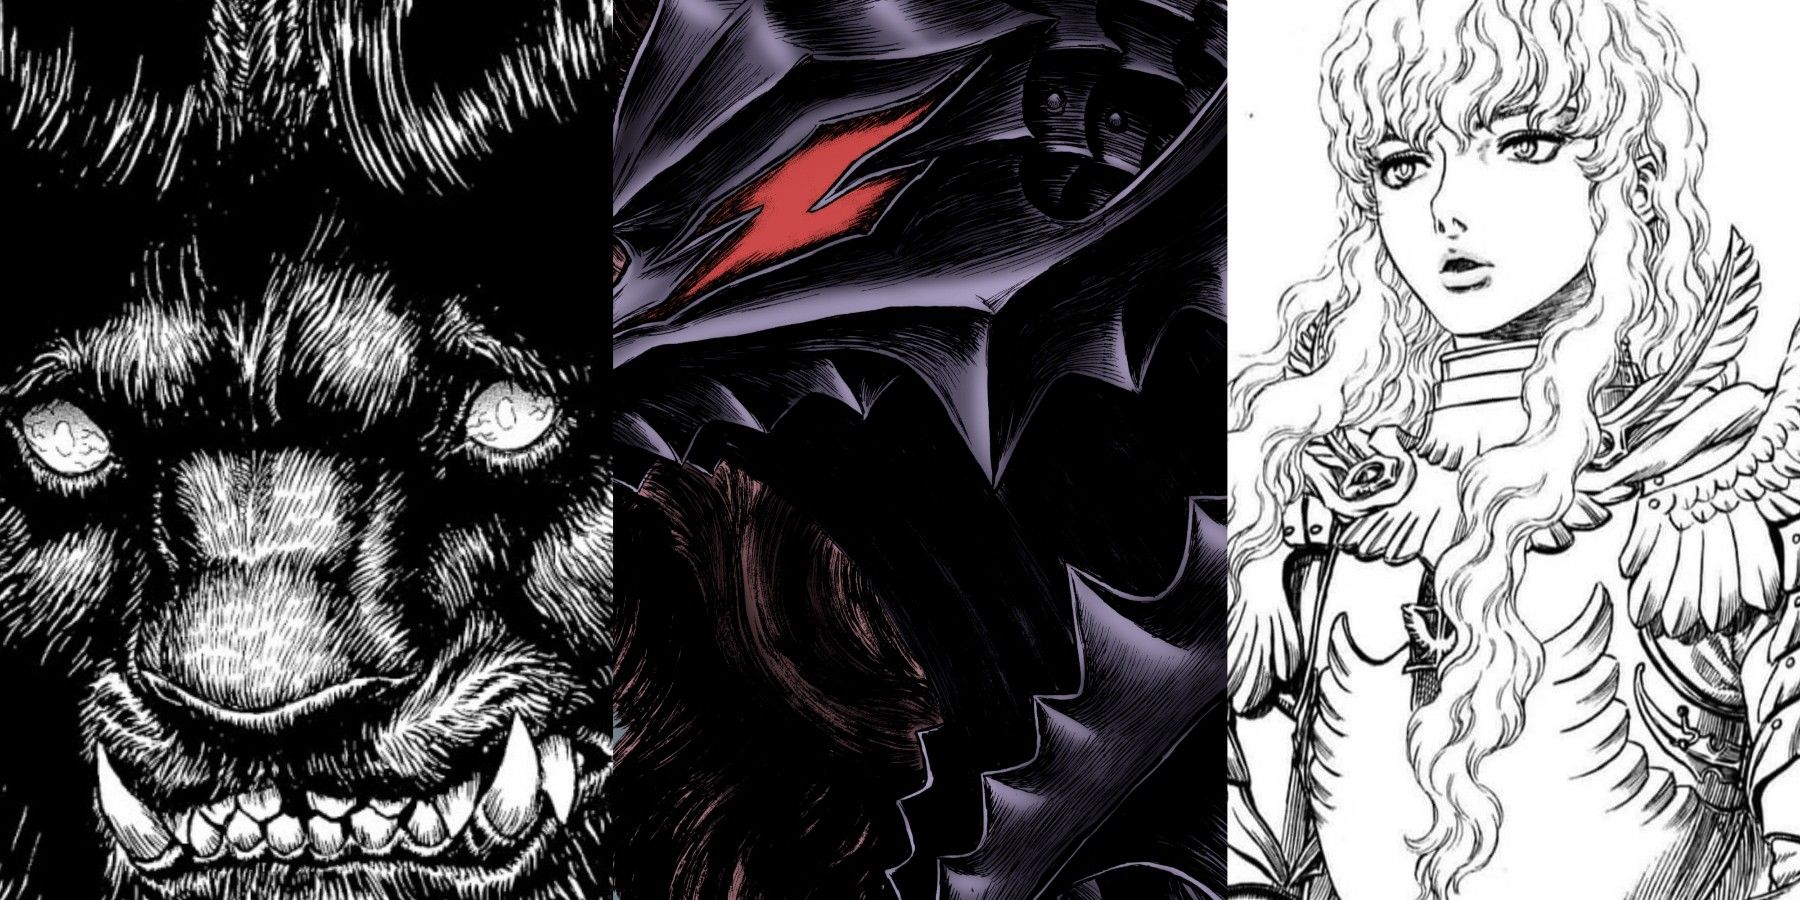 featured berserk every main character age birthday height guts Griffith zodd